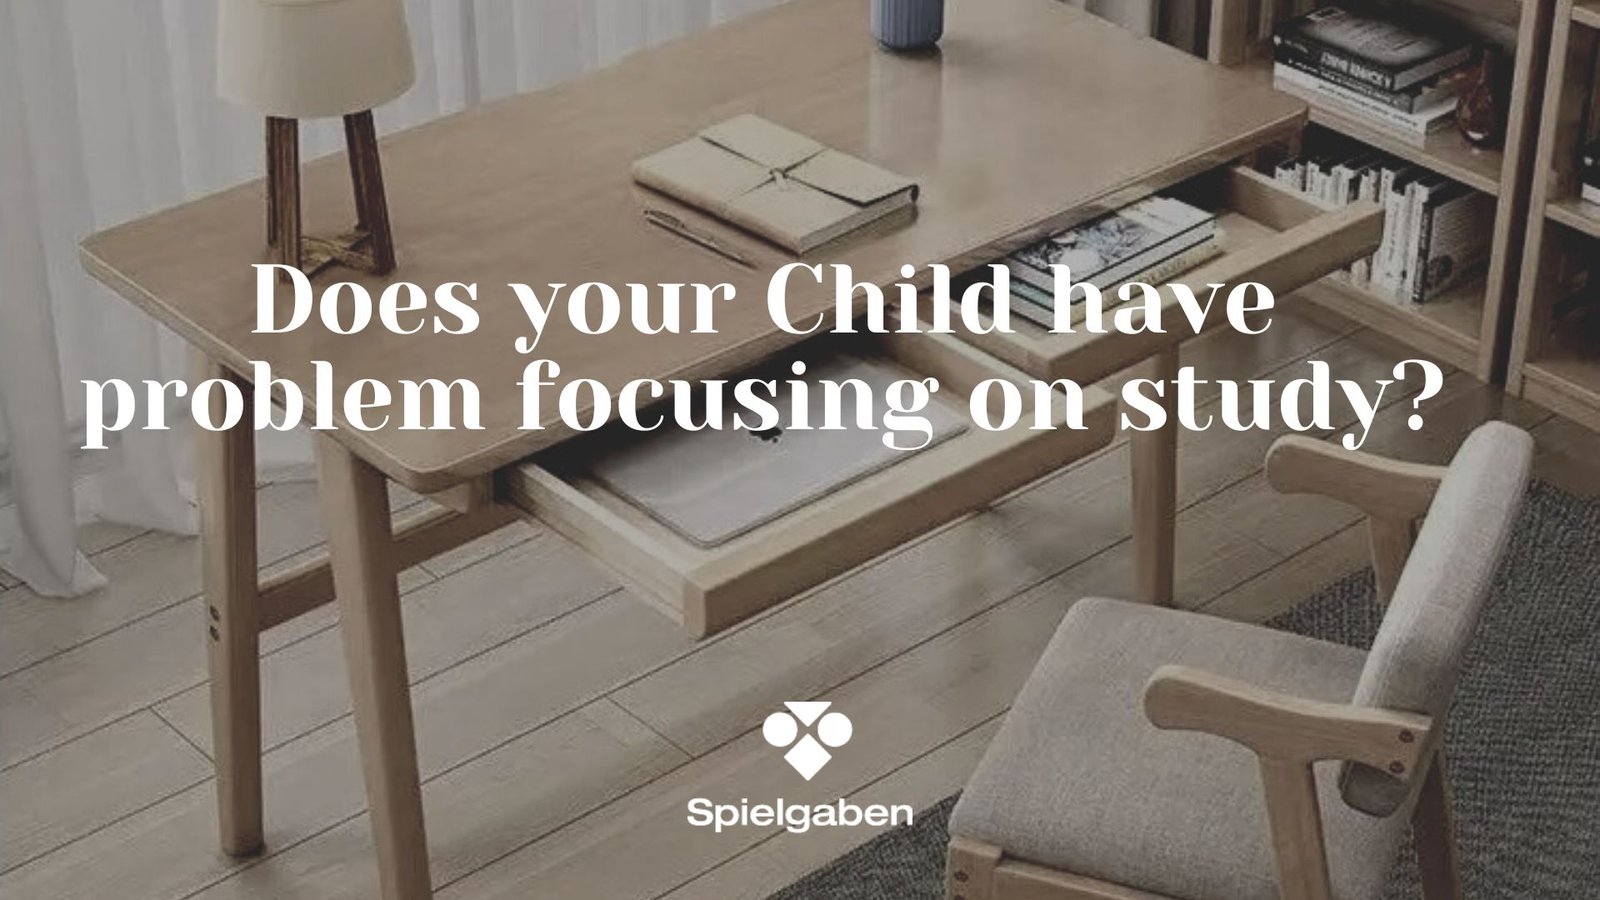 Does your child have problem focusing on study?